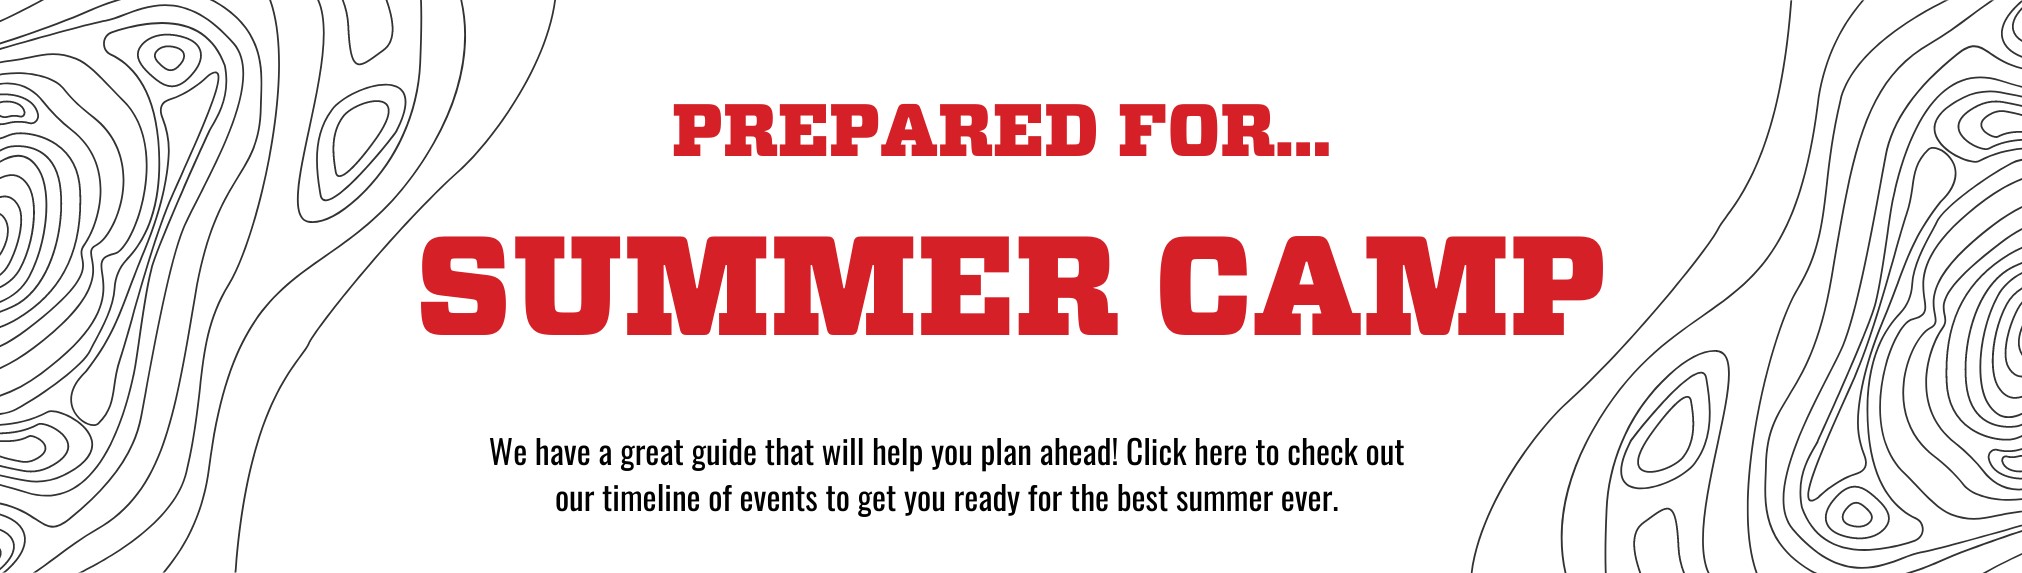 Prepared for... Summer camp! We have a great guide that will help you plan ahead! Click here to check out our timeline of events to get you ready for the best summer ever.